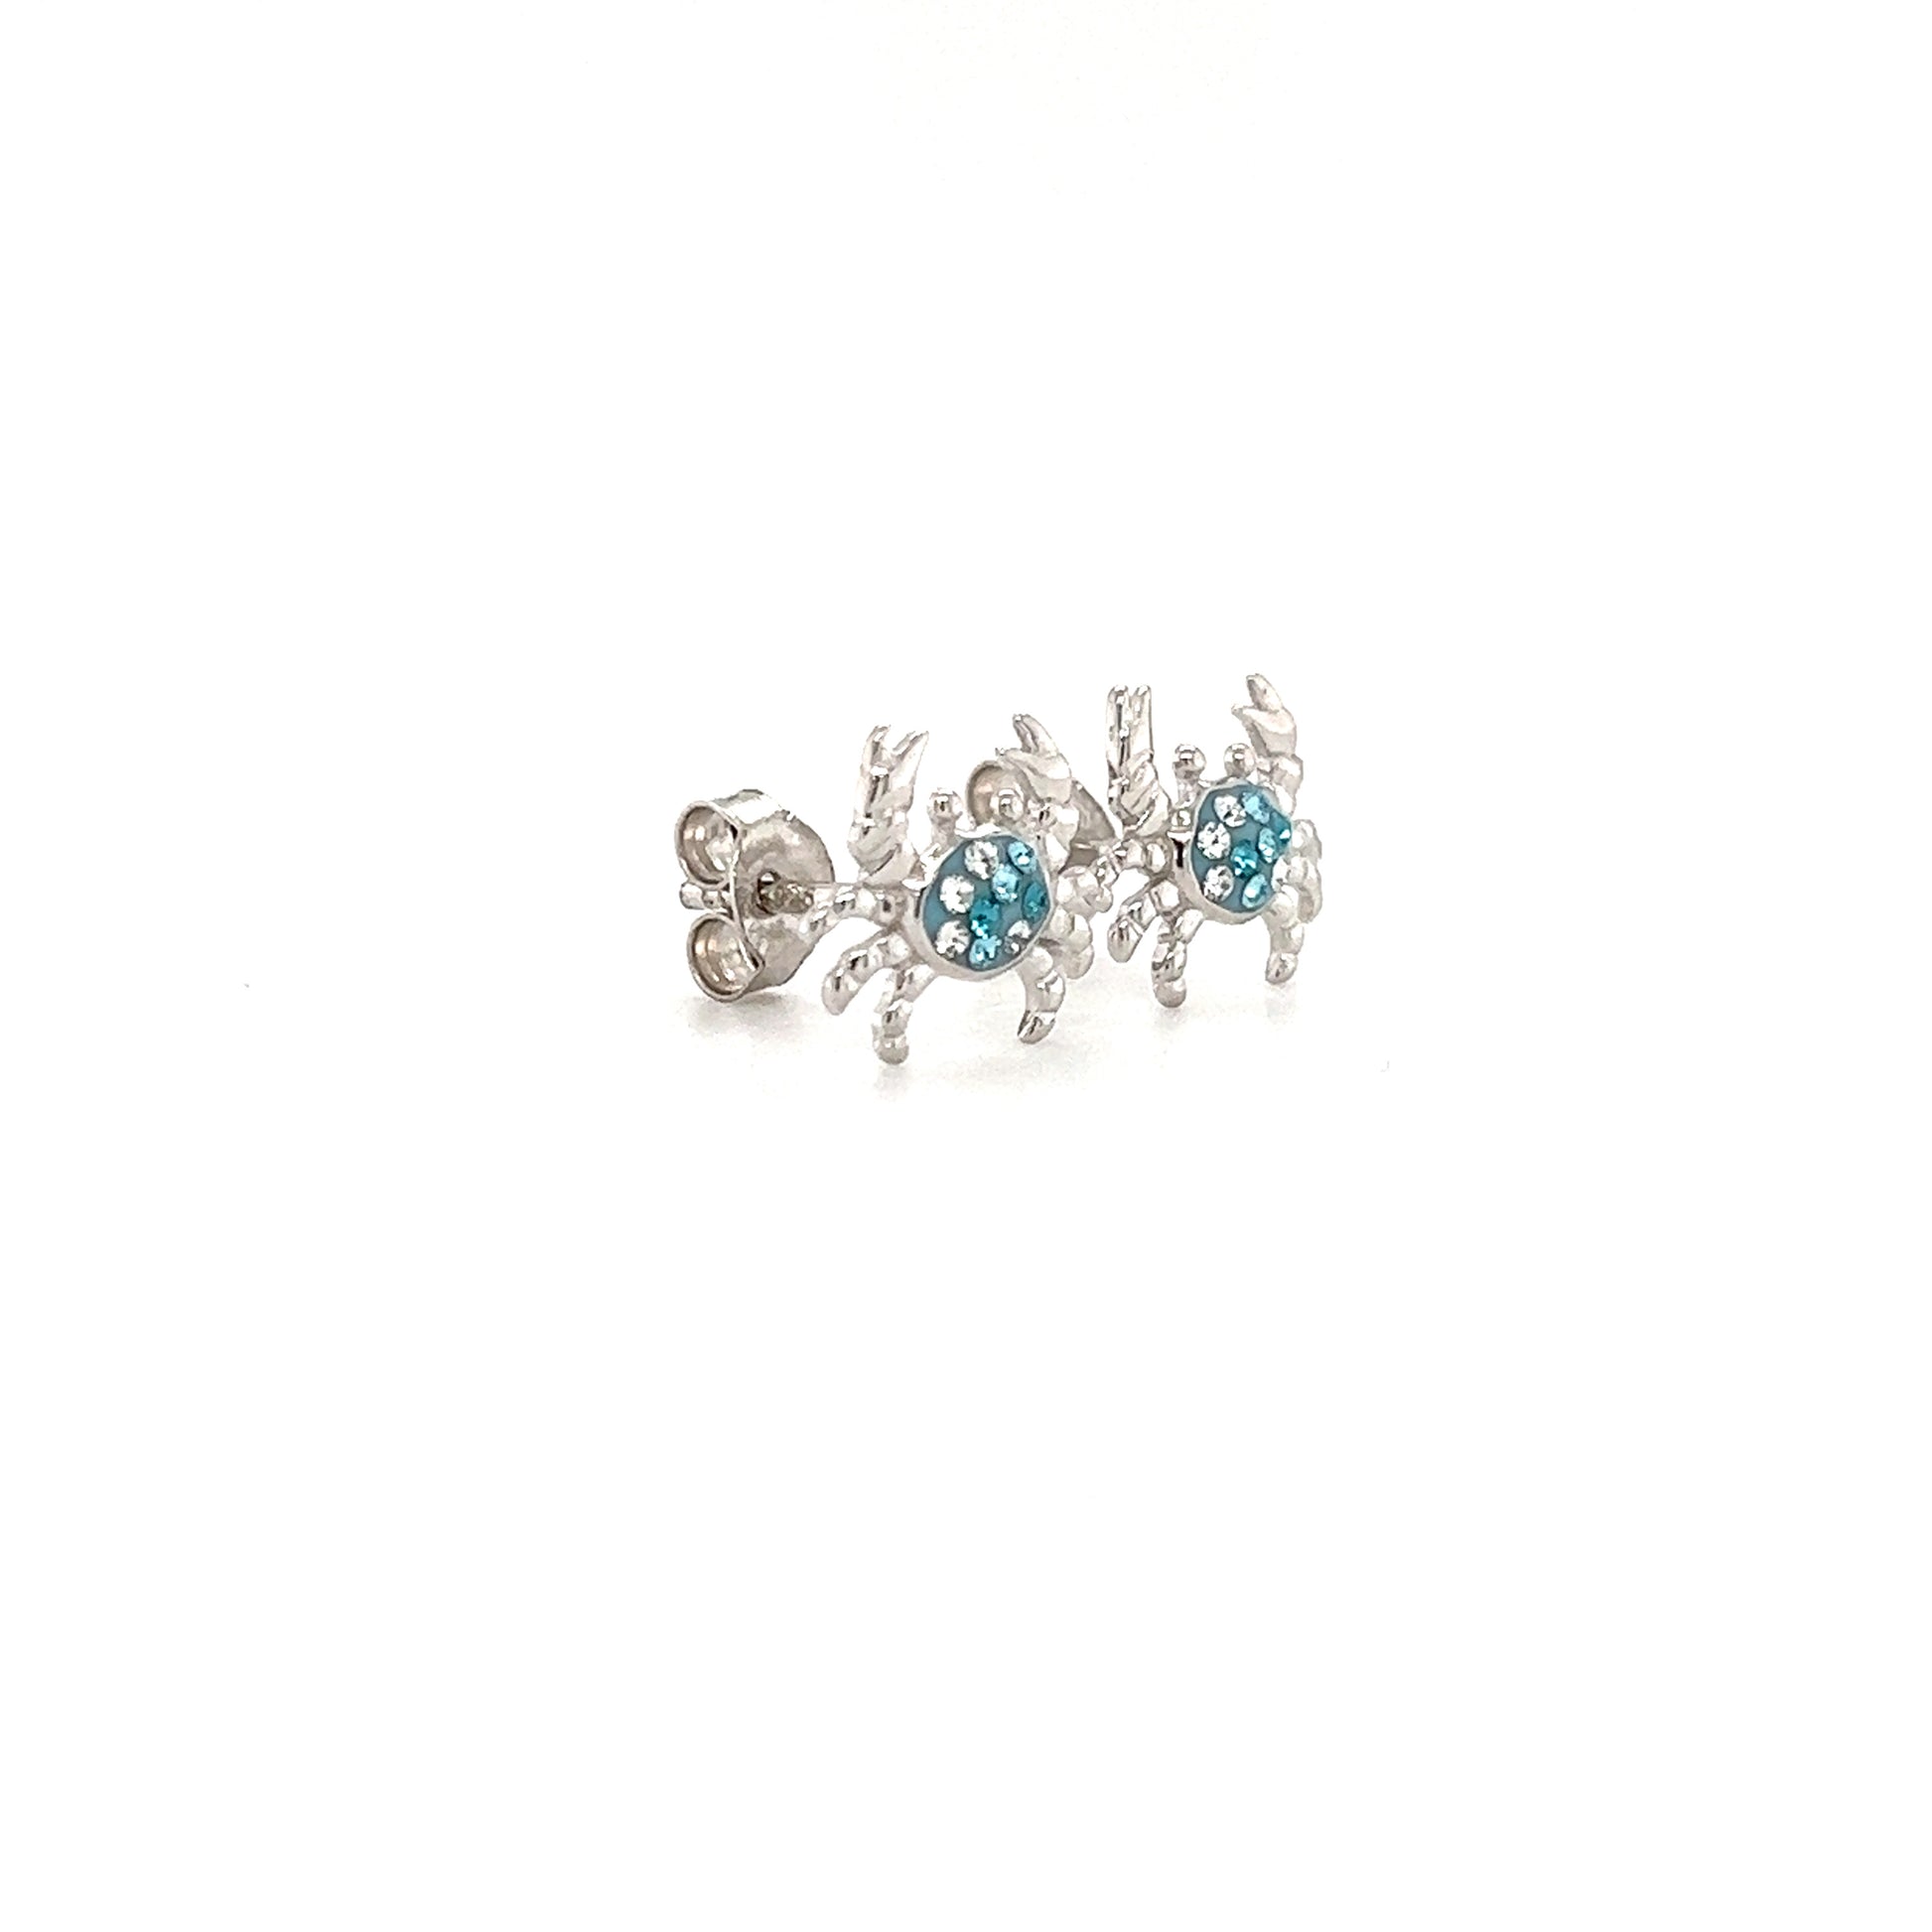 Blue Crab Stud Earrings with Aqua and White Crystals in Sterling Silver Left Side View